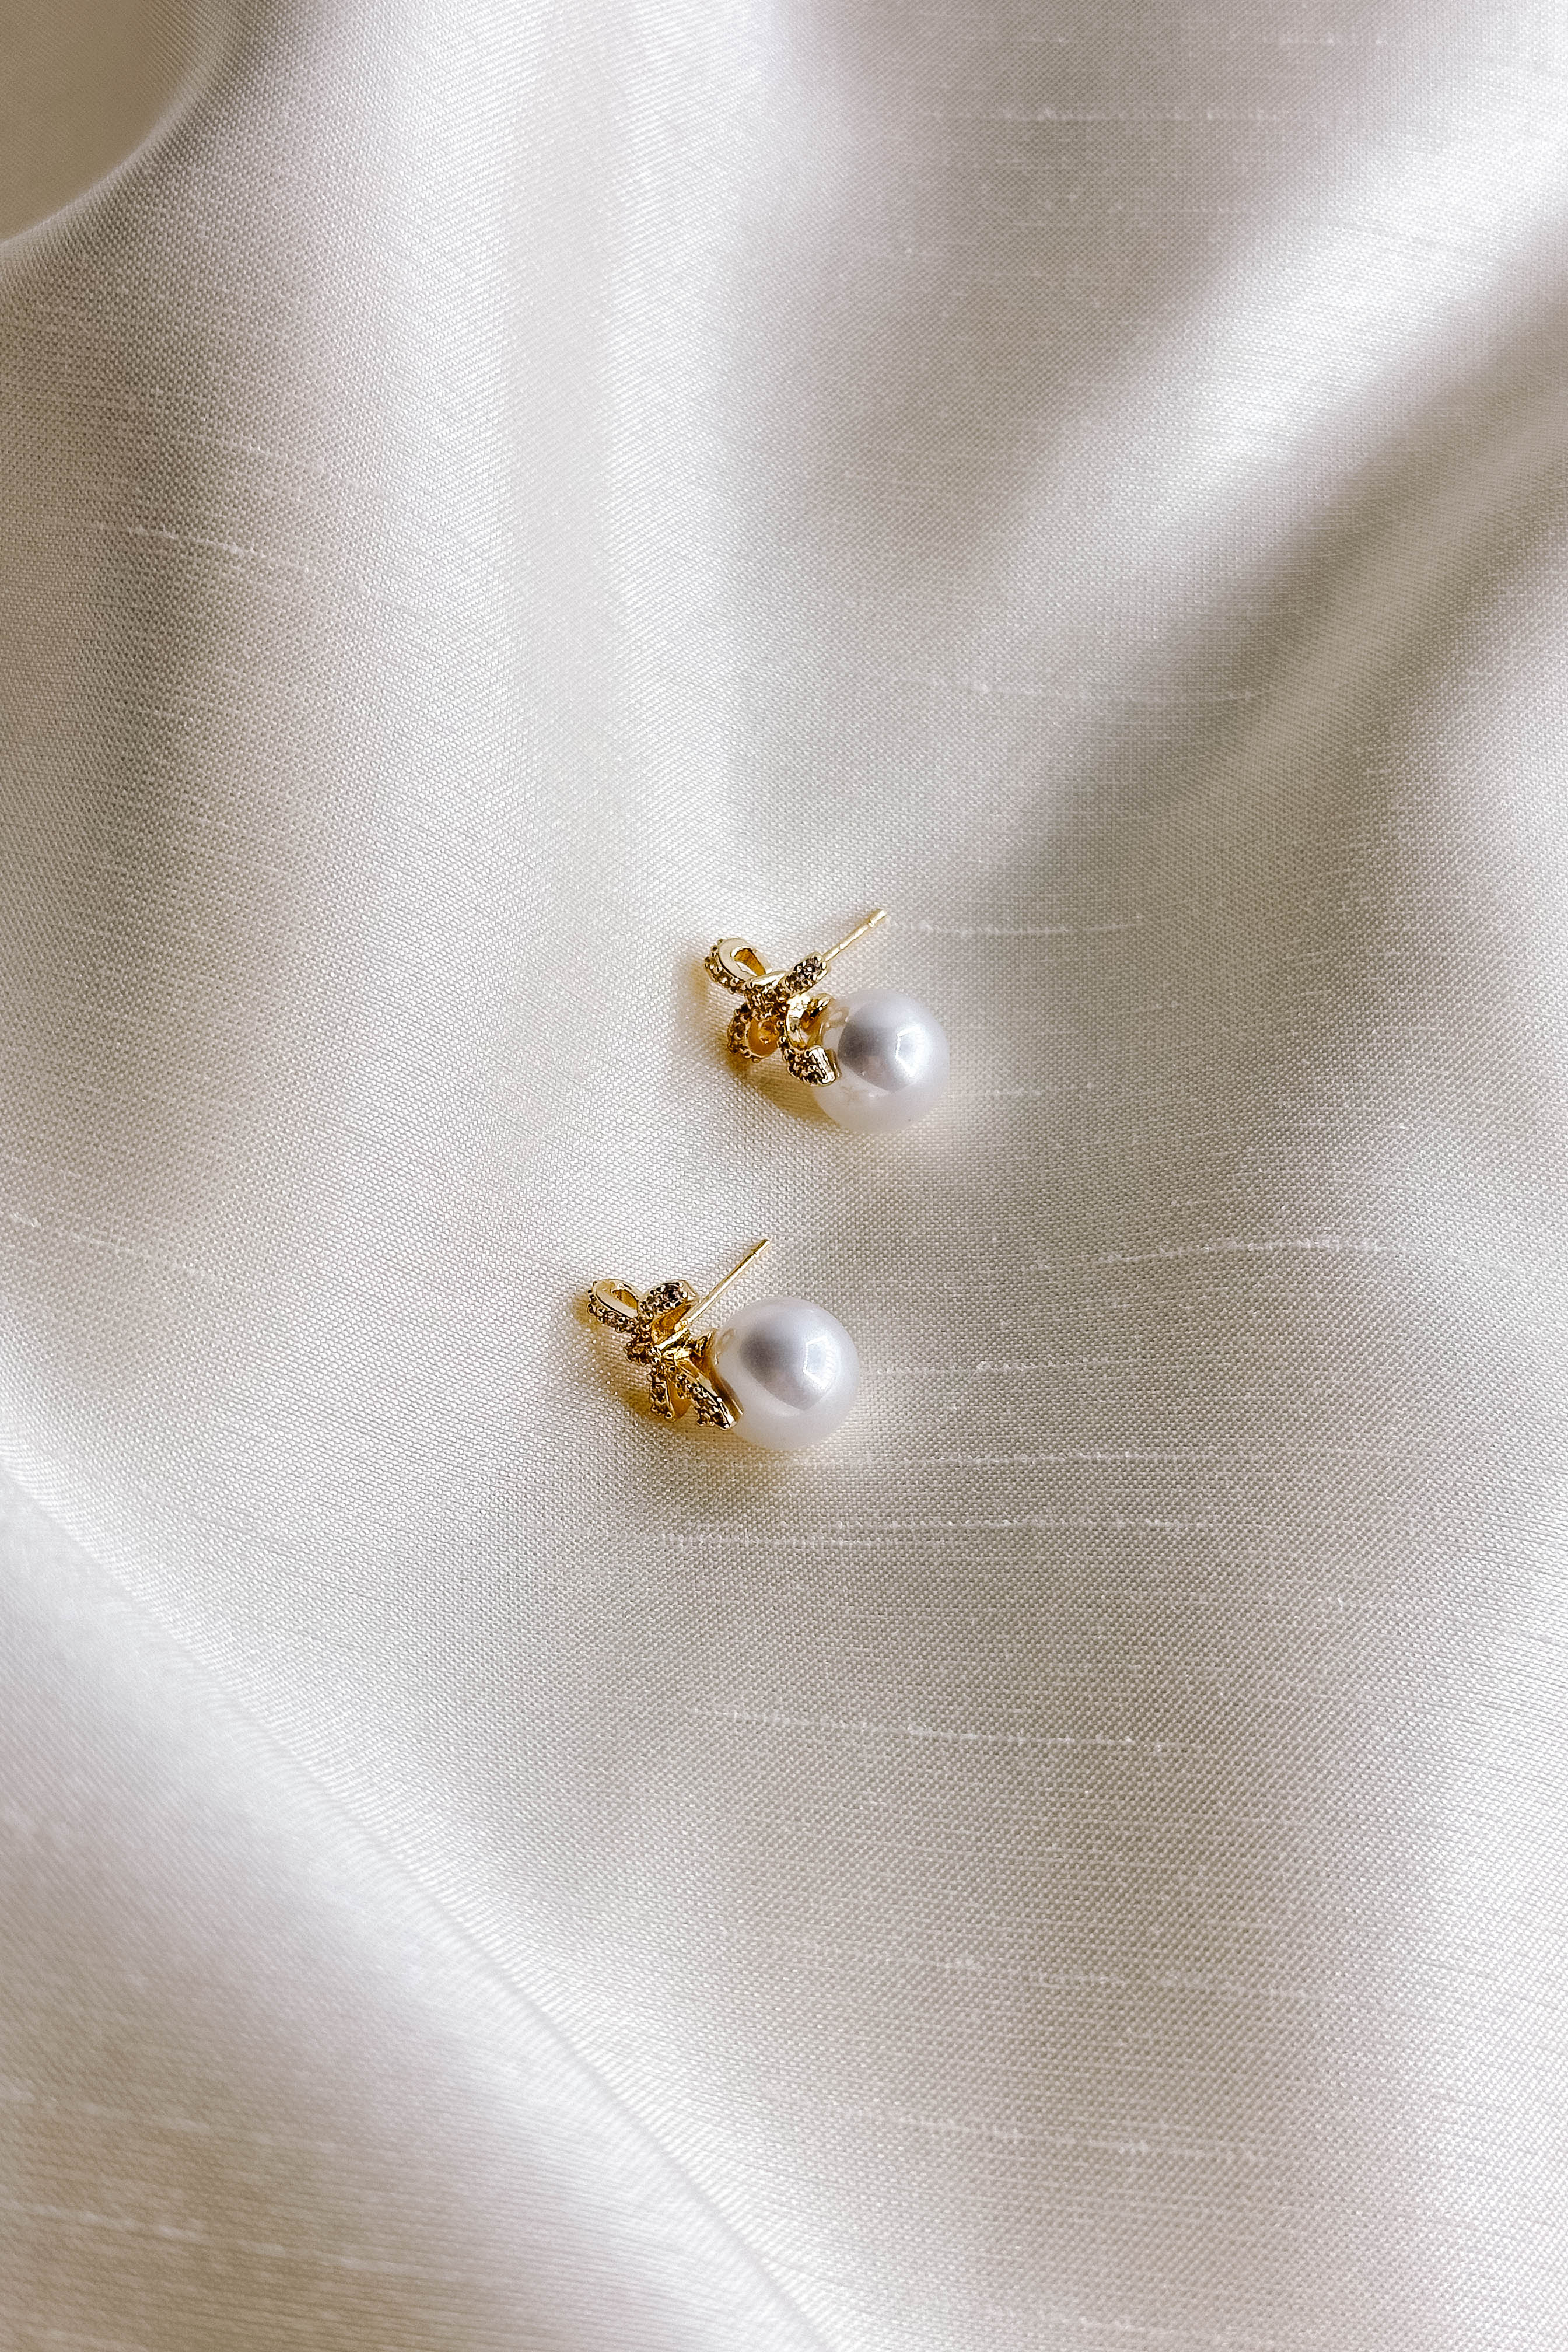 Flat lay close up view of both pearl earring with gold and rhinestone bow